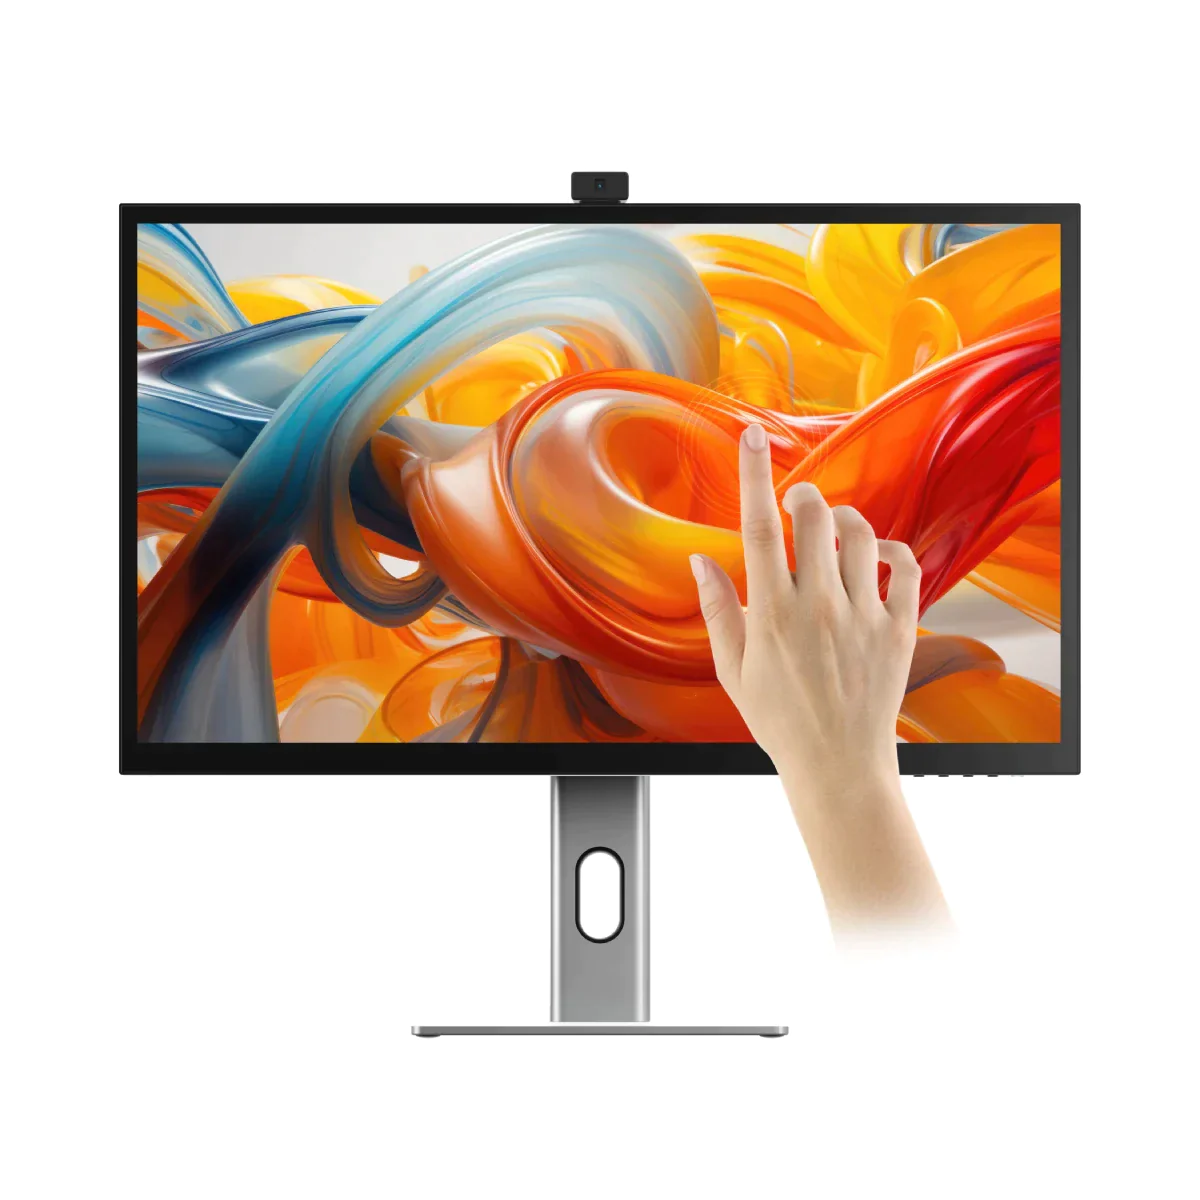 CLARITY 27" UHD 4K Monitor + Clarity Pro Touch 27" UHD 4K Monitor with 65W PD, Webcam and Touchscreen + Dual 4K Universal Docking Station "DisplayPort Edition